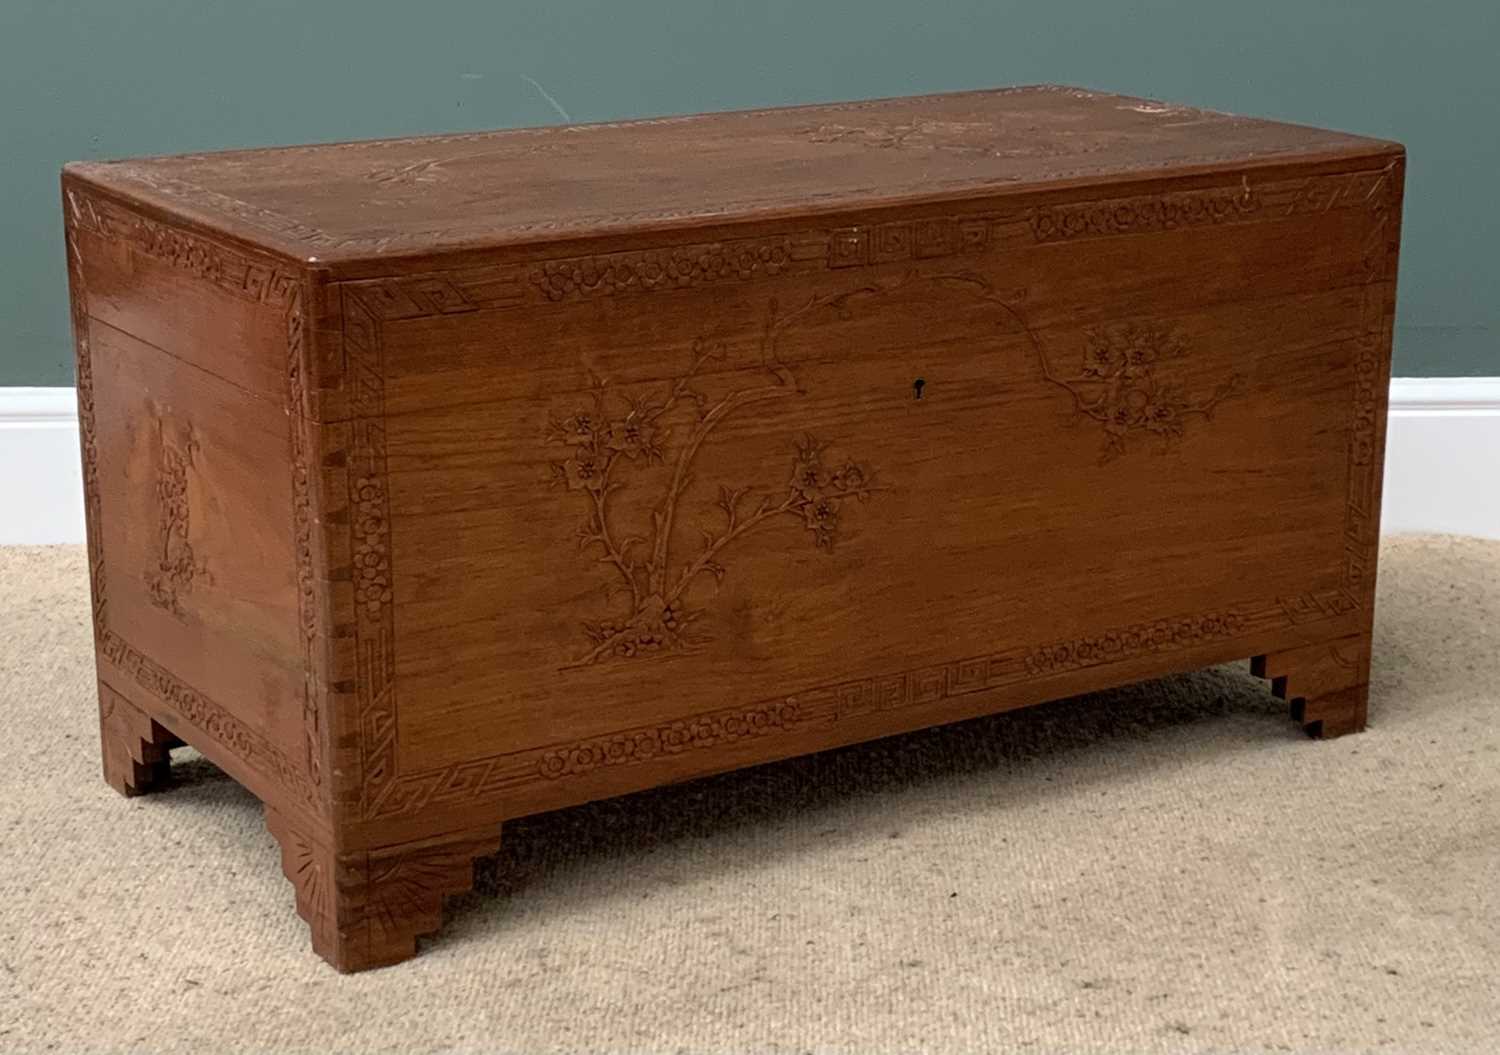 EASTERN CAMPHOR WOOD CHEST with carved foliage detail, 50cms H, 95cms W, 46cms D - Image 2 of 3